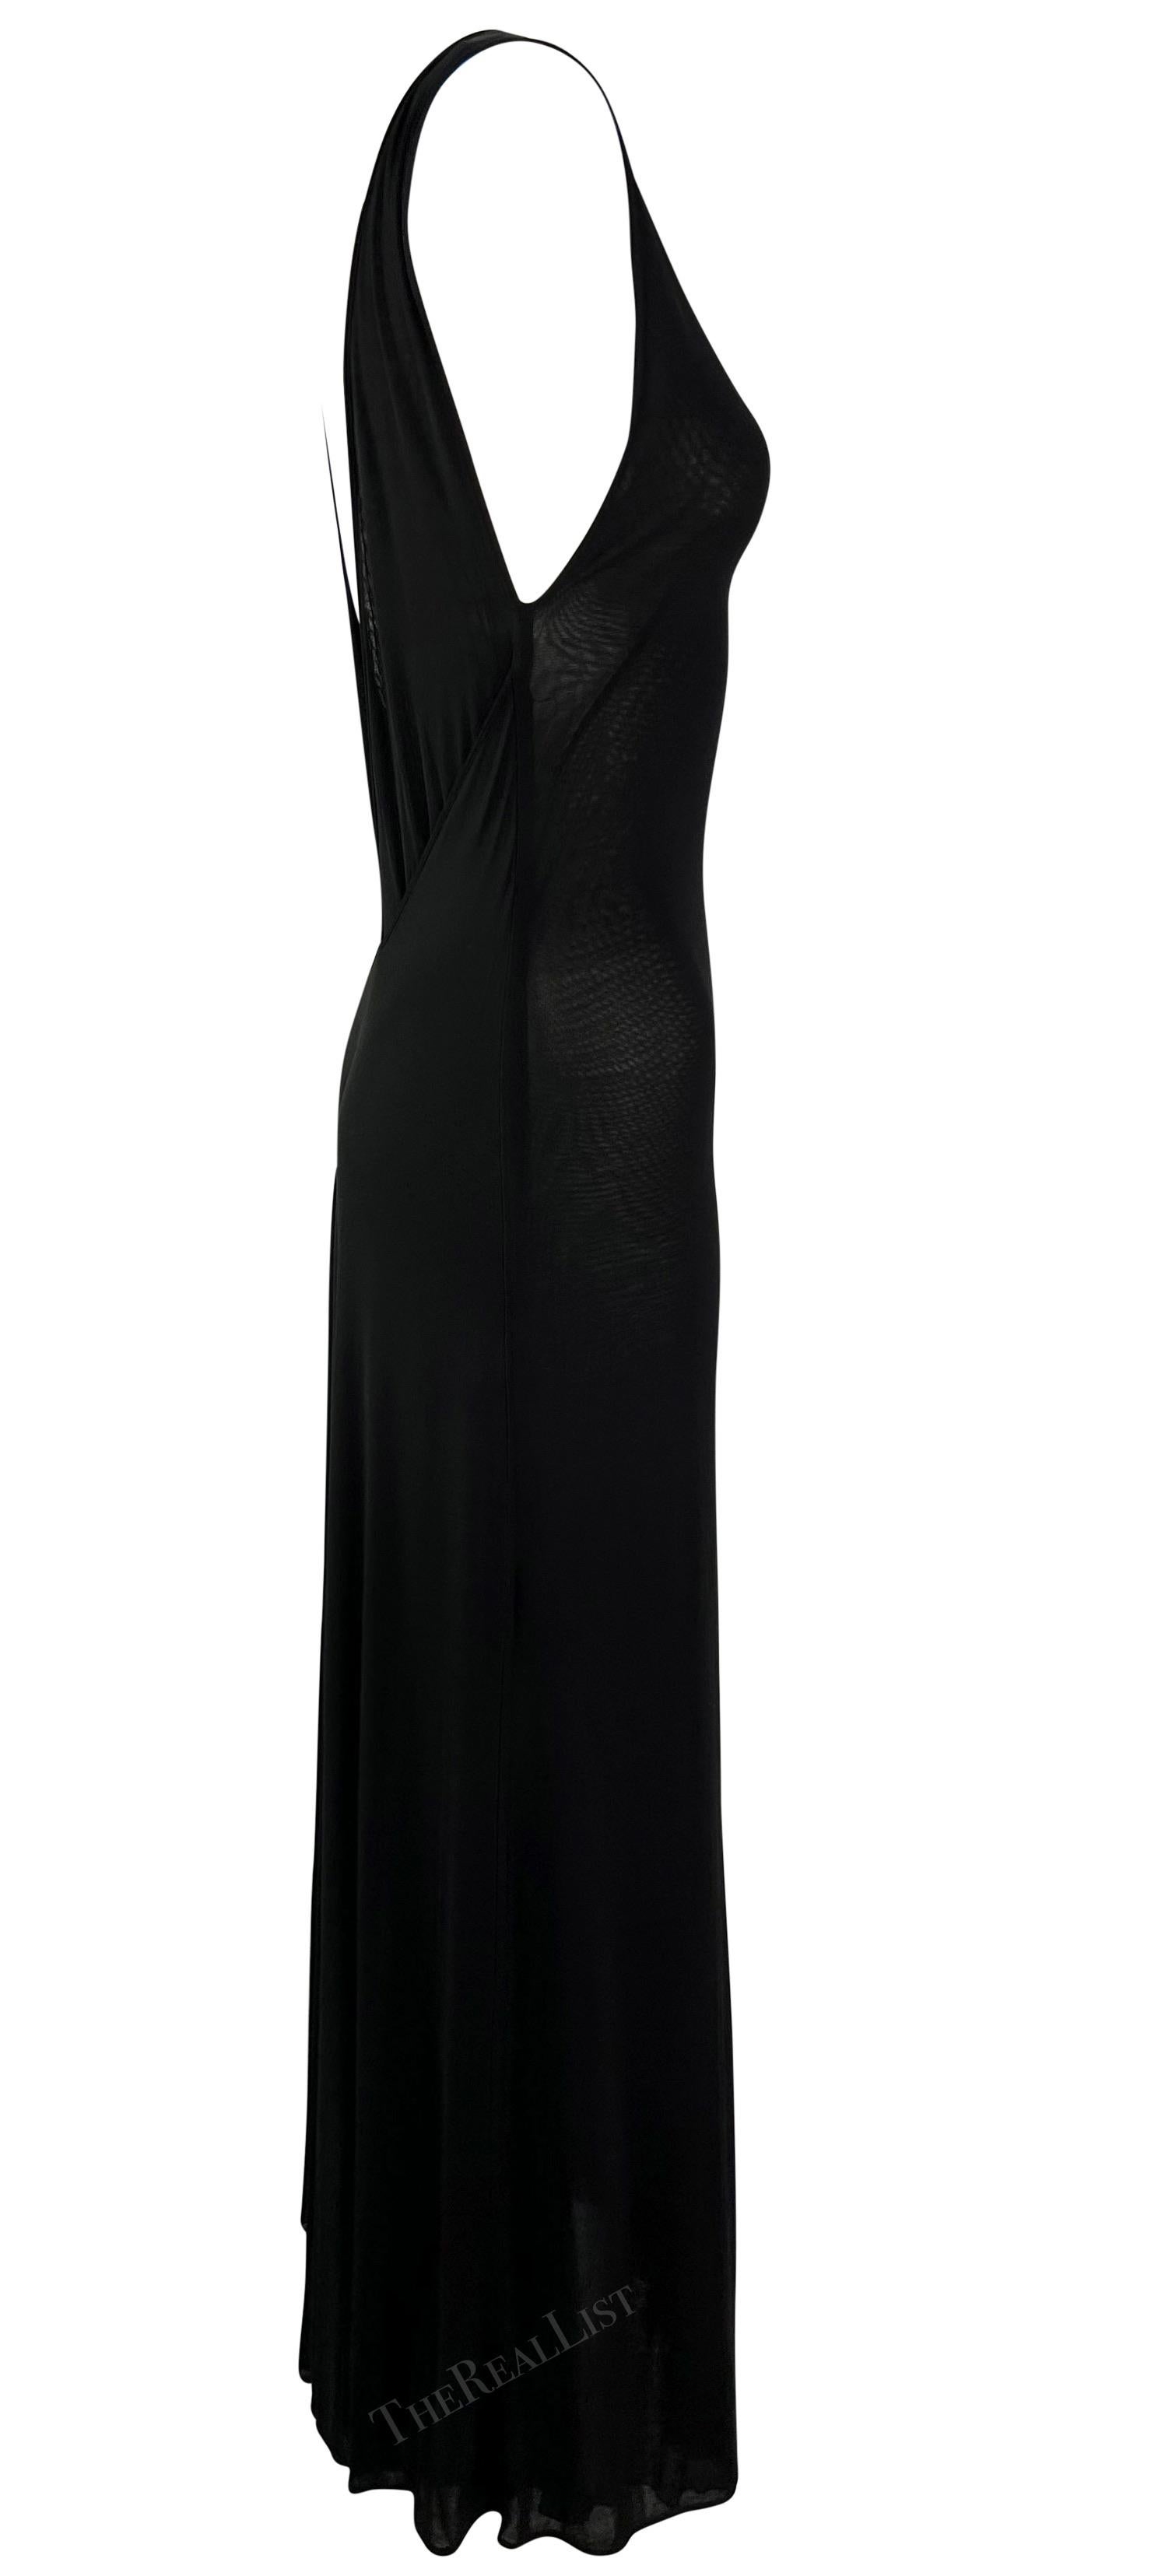 Late 1990s Giorgio Armani Sheer Plunging Back Bodycon Gown In Good Condition For Sale In West Hollywood, CA